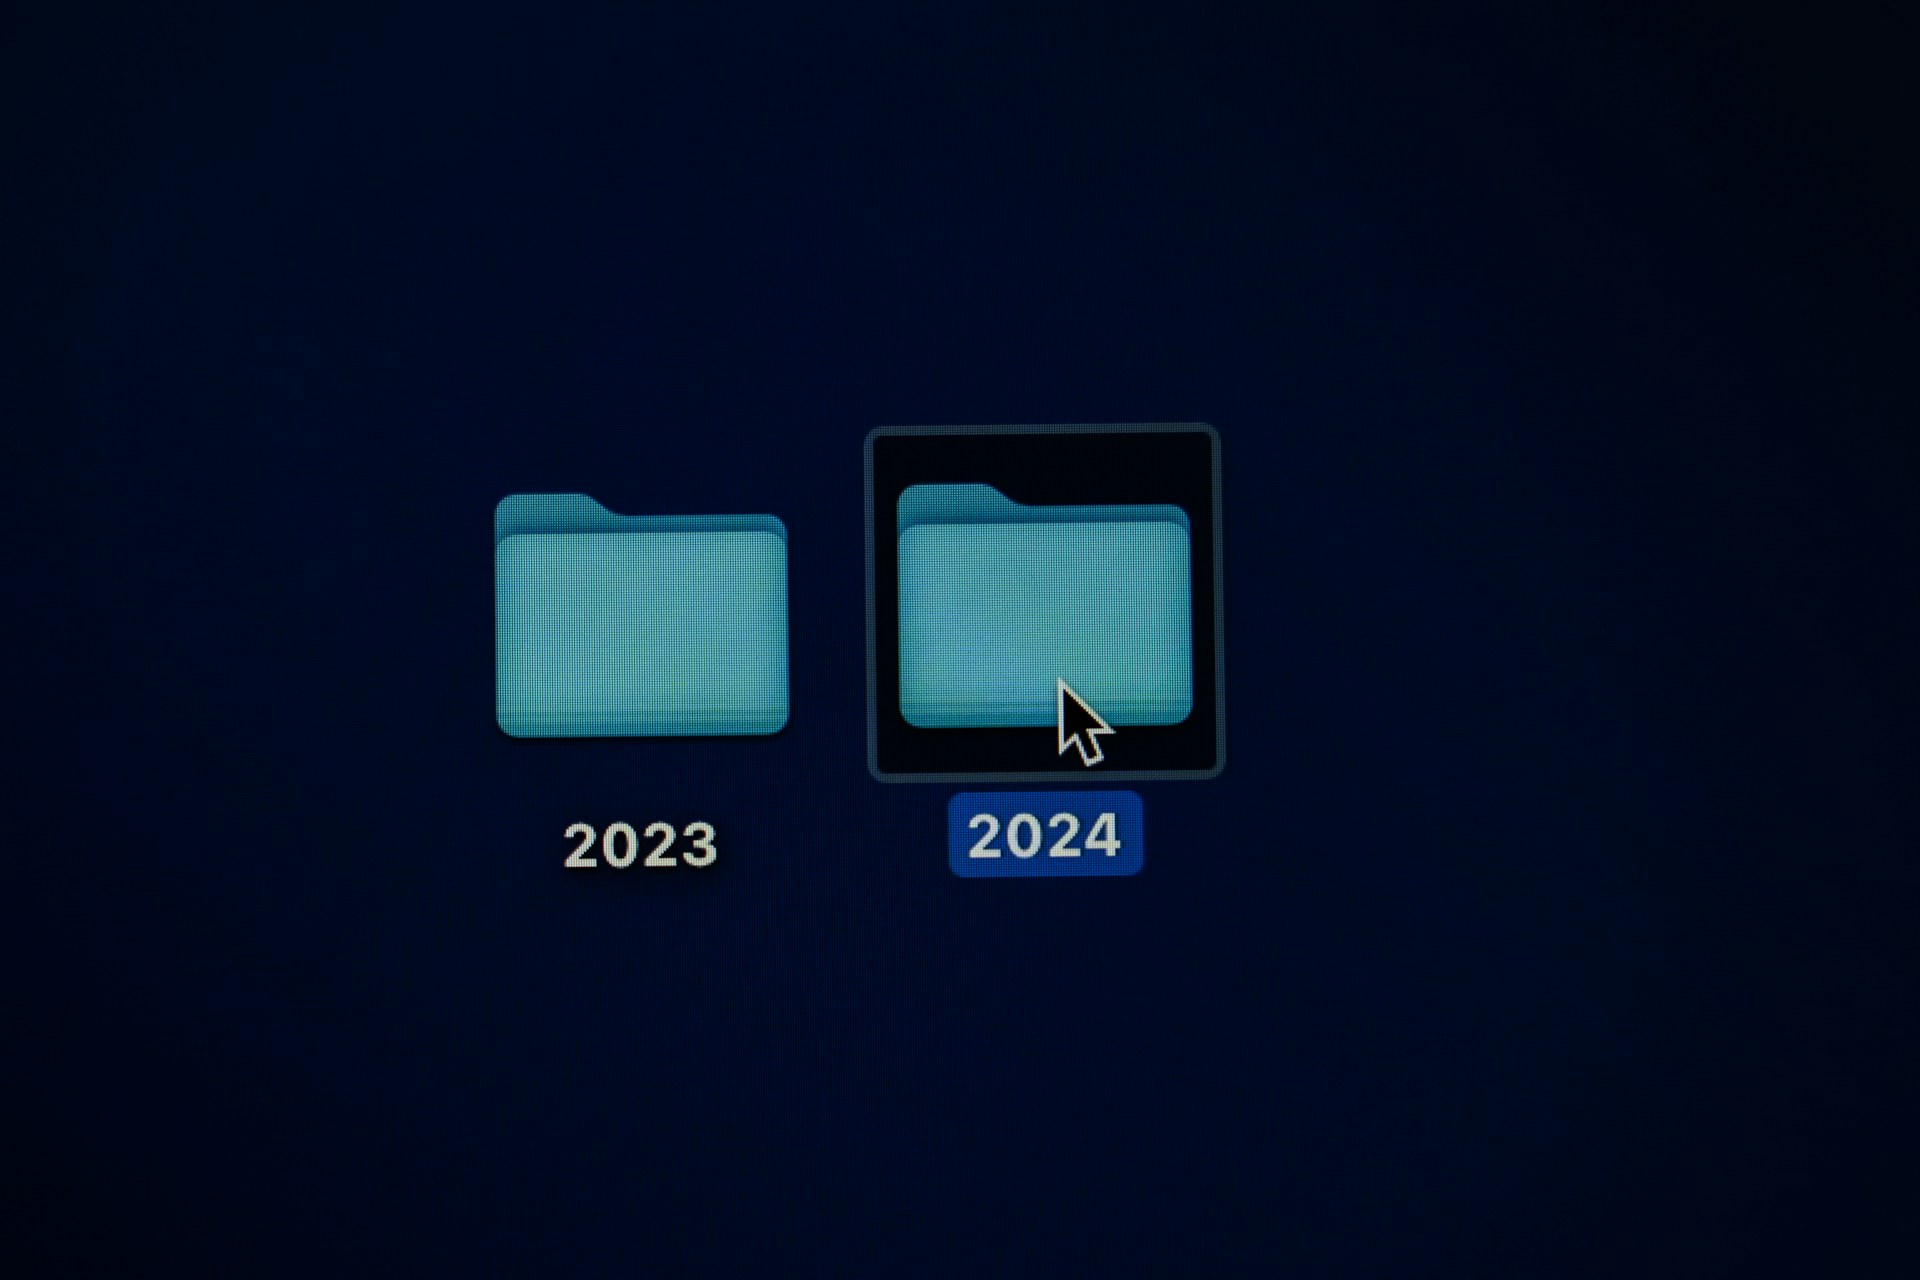 desktop files labeled 2023 and 2024